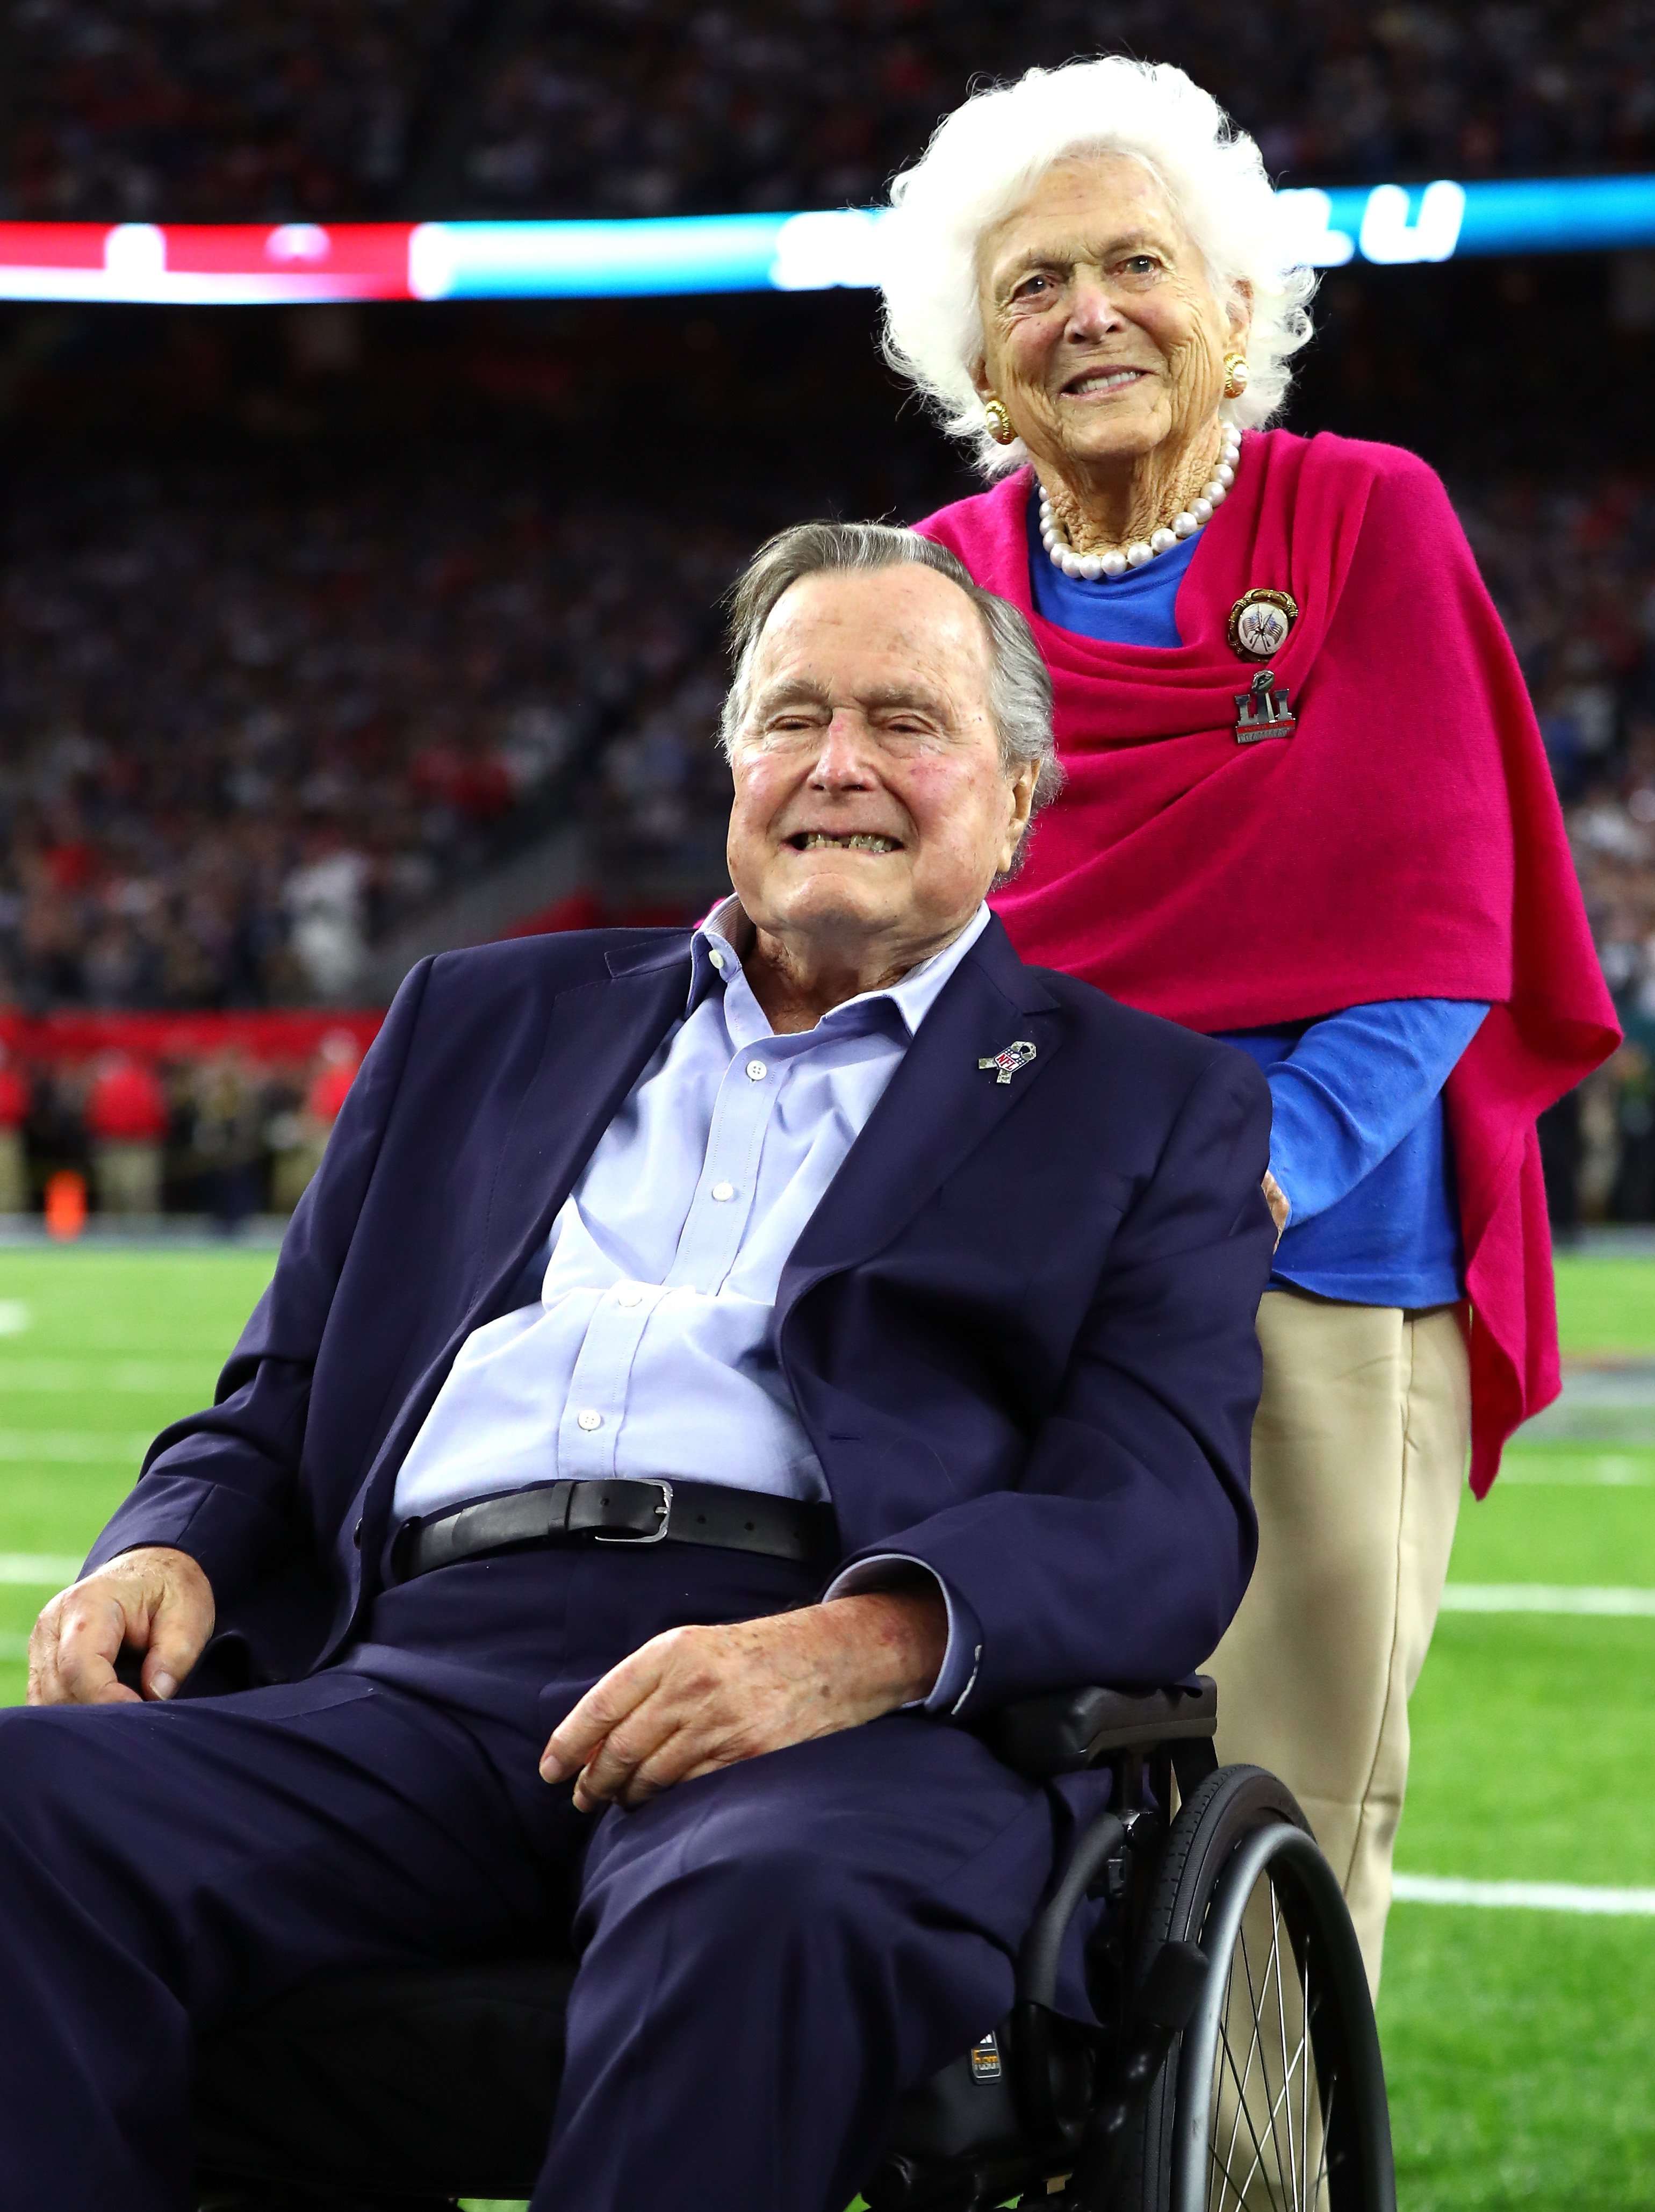 President George H.W. Bush and Barbara Bush arrive for the coin toss prior to Super Bowl 51 between the Atlanta Falcons and the New England Patriots at NRG Stadium on February 5, 2017 in Houston, Texas. | Source: Getty Images